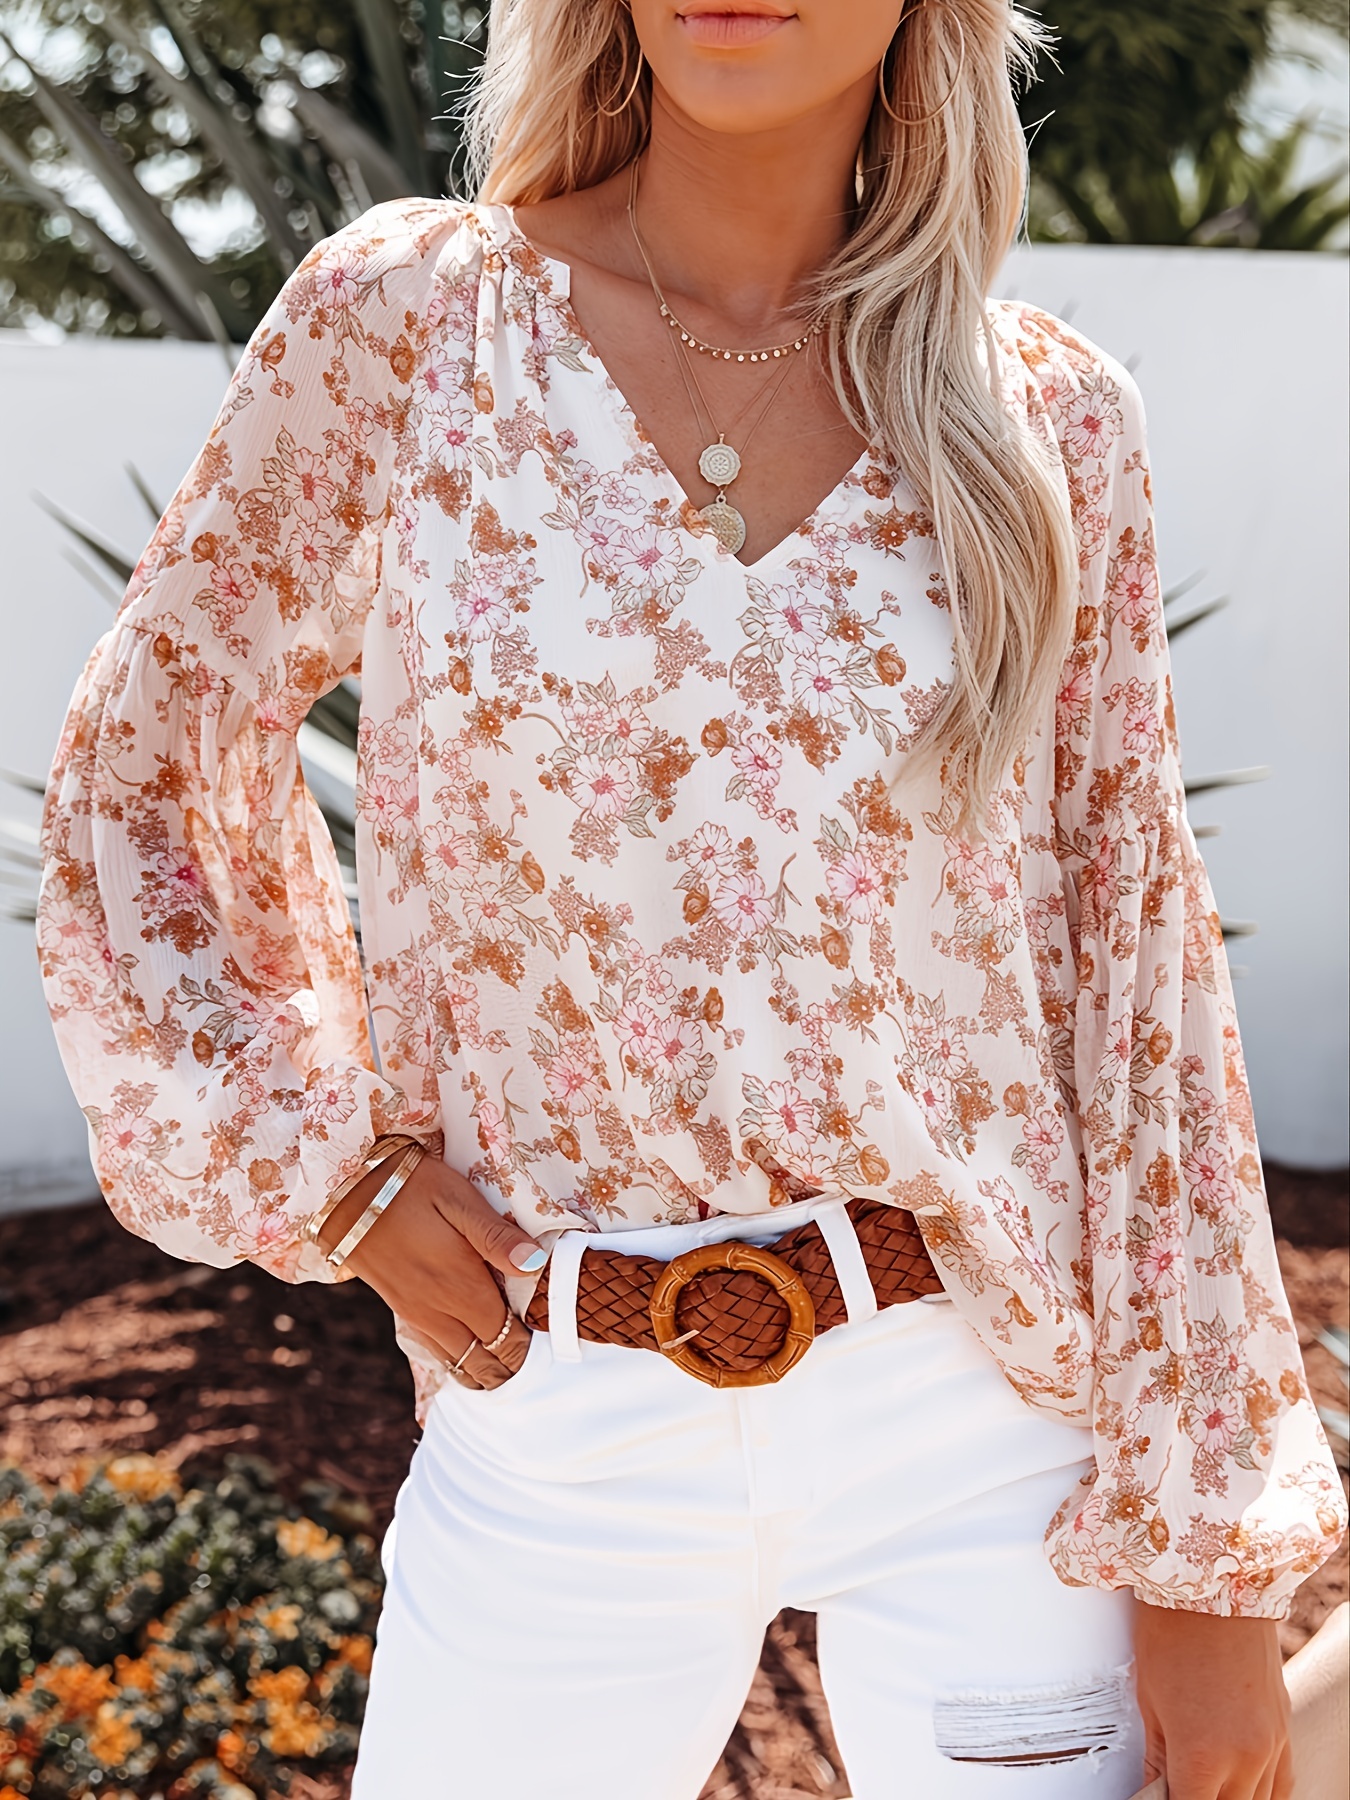 Fashion Women Vintage Cotton Bluse V Neck Long Sleeve Floral Embroidery  Blouse Shirt Tops